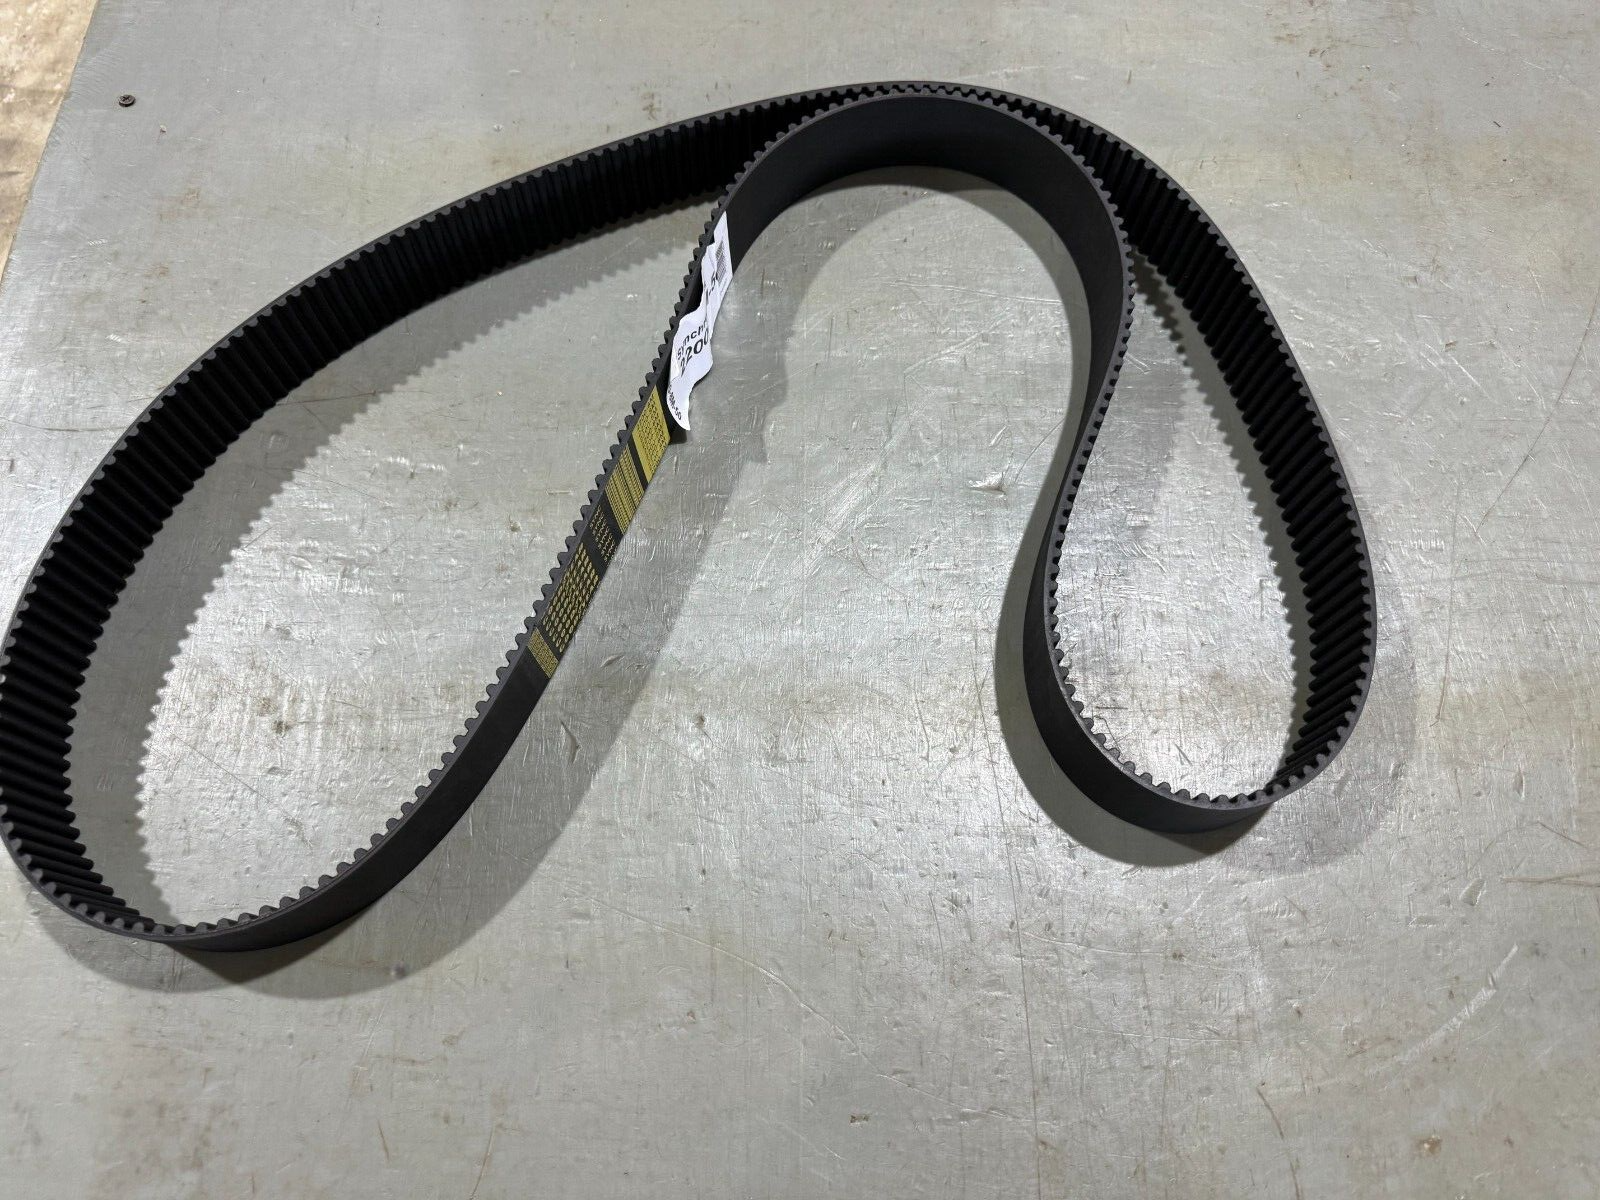 FACTORY NEW GOODYEAR SYNCHRONOUS Sync HTD TIMING BELT 2200-8M-50